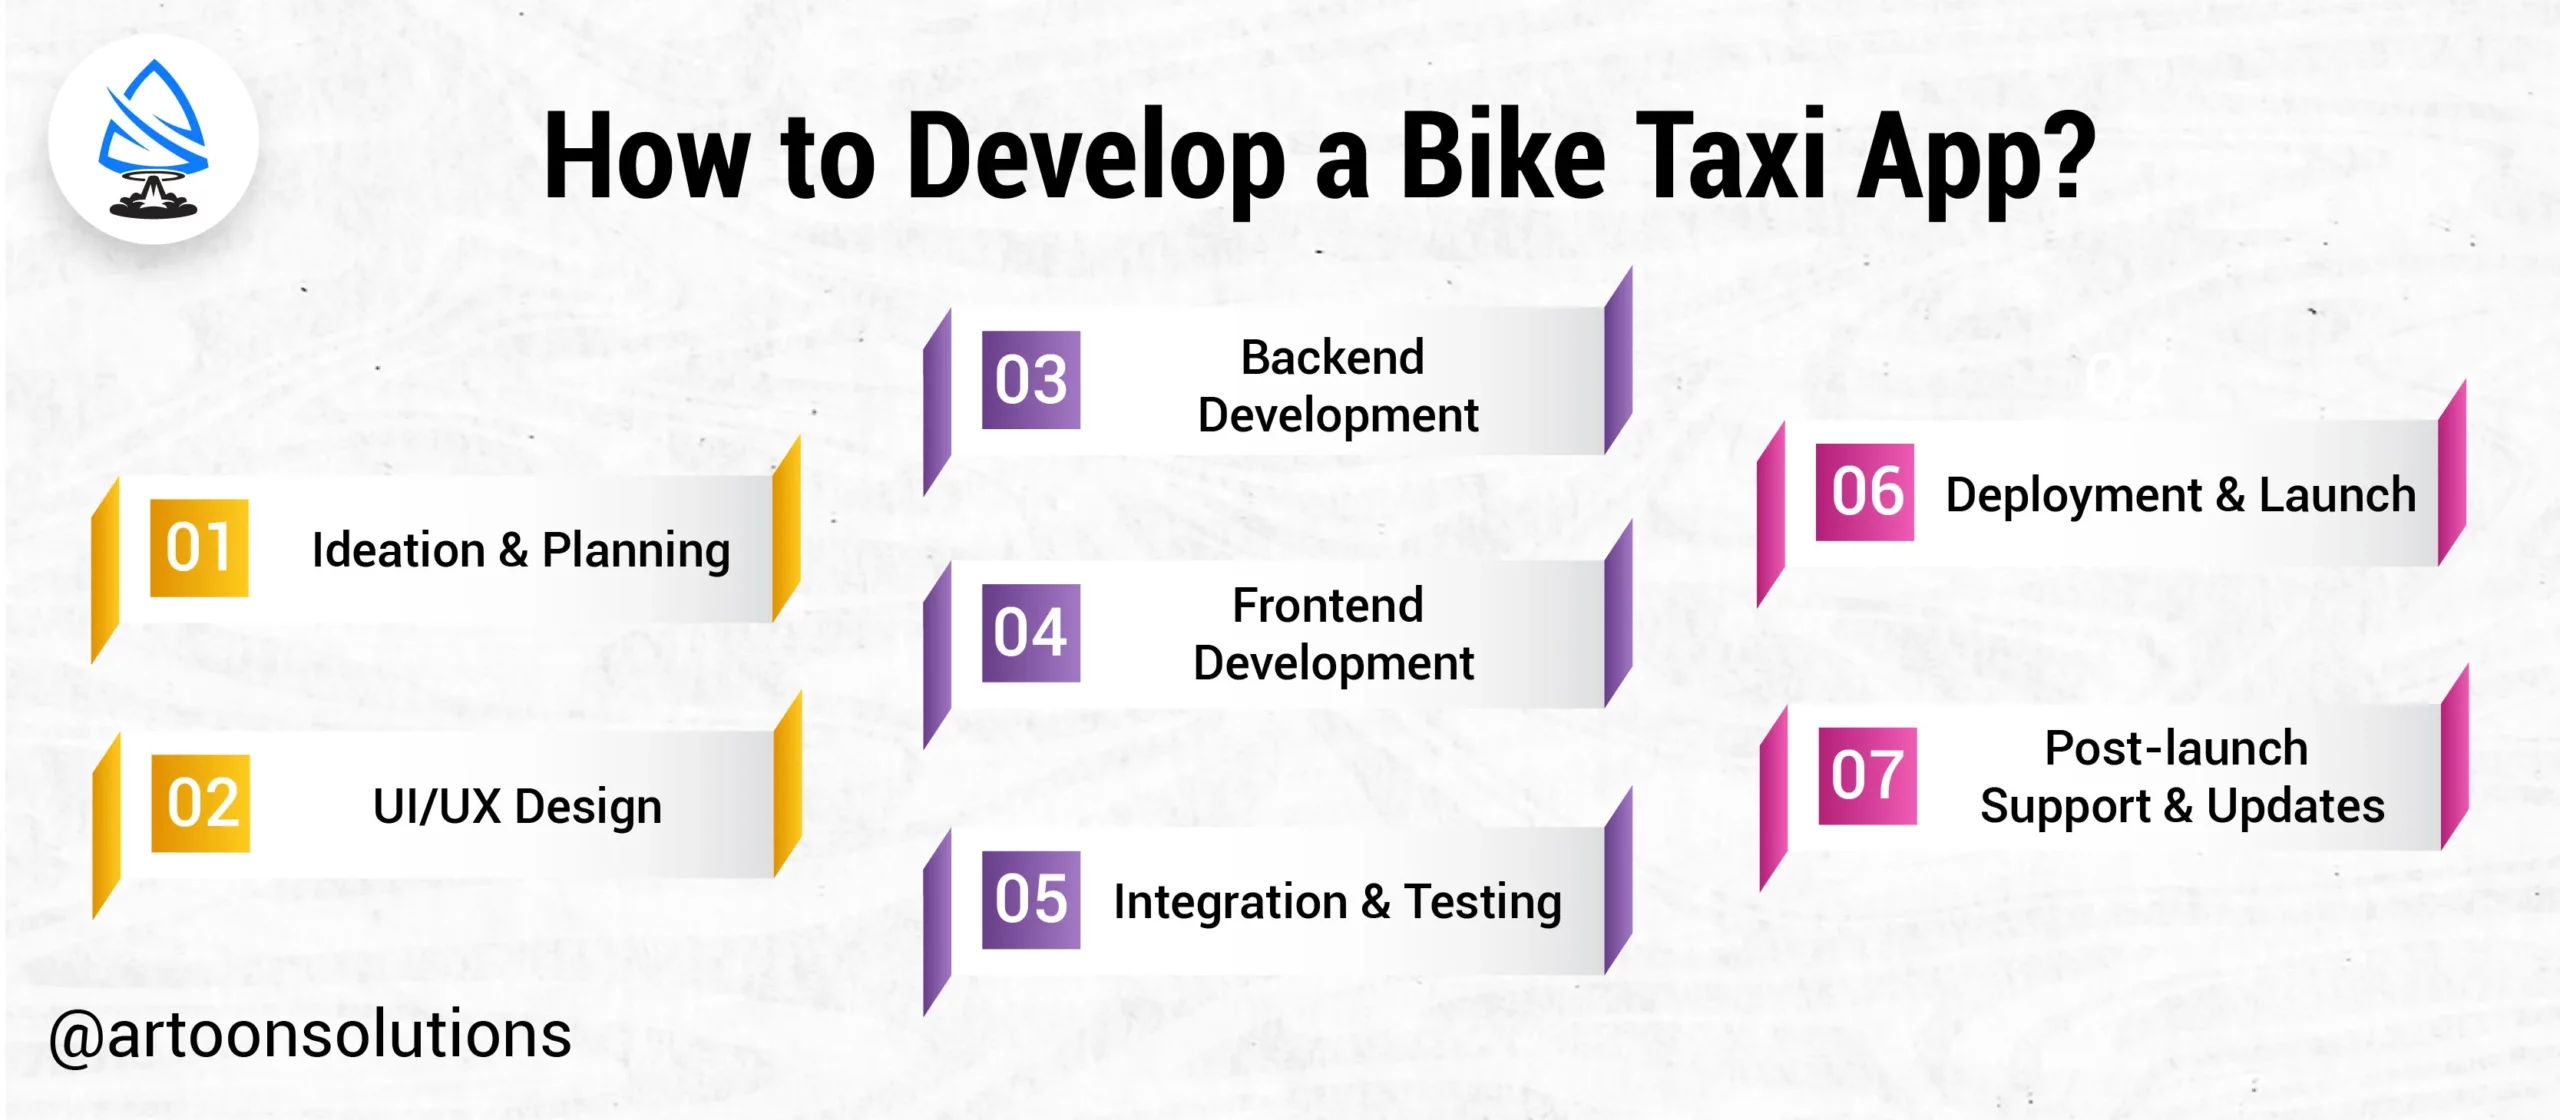 How to Develop a Bike Taxi App?